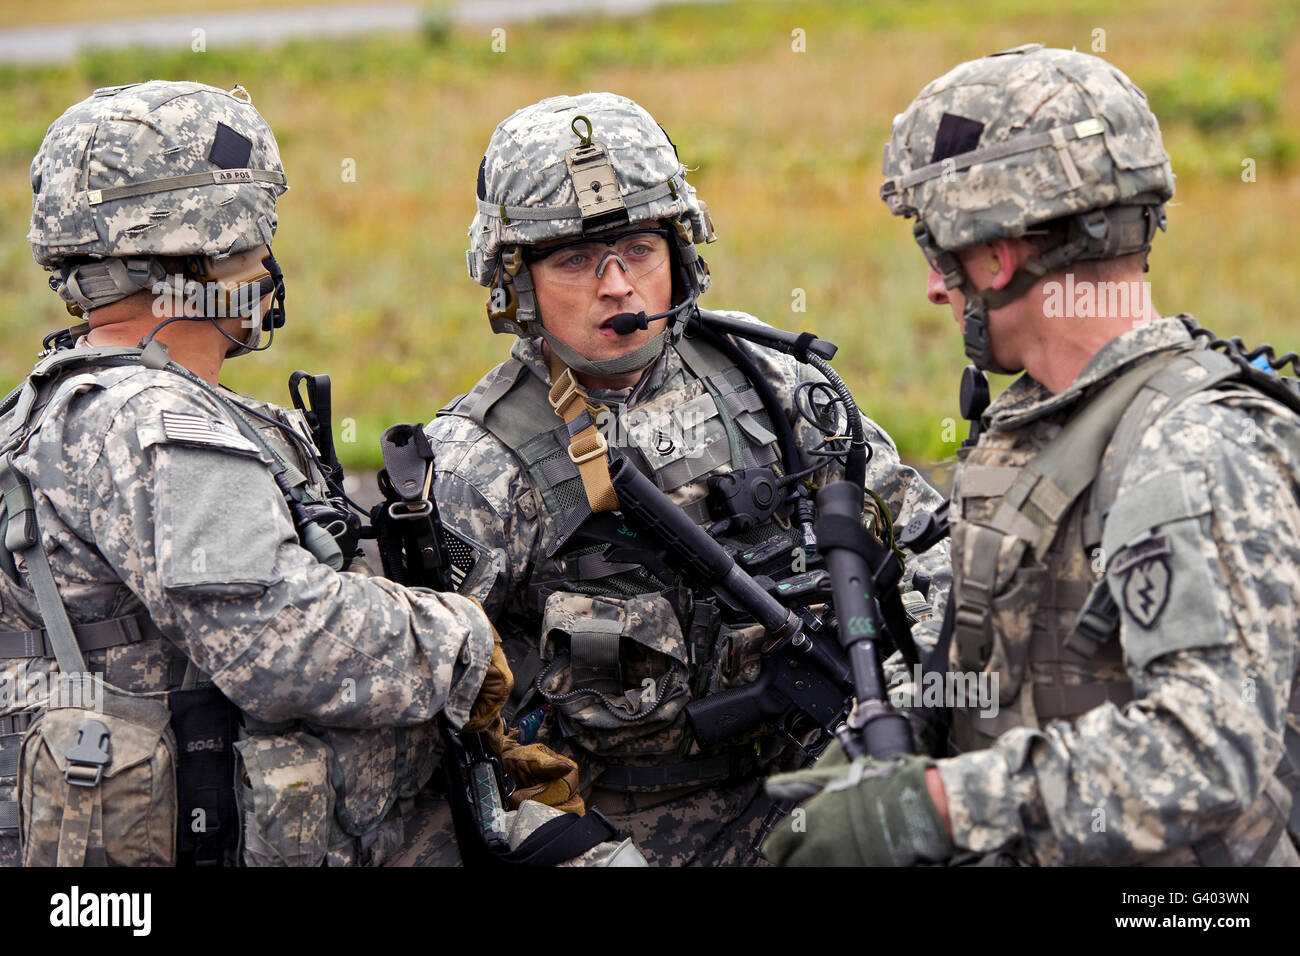 U.S. Army Soldiers discuss a plan of action. Stock Photo